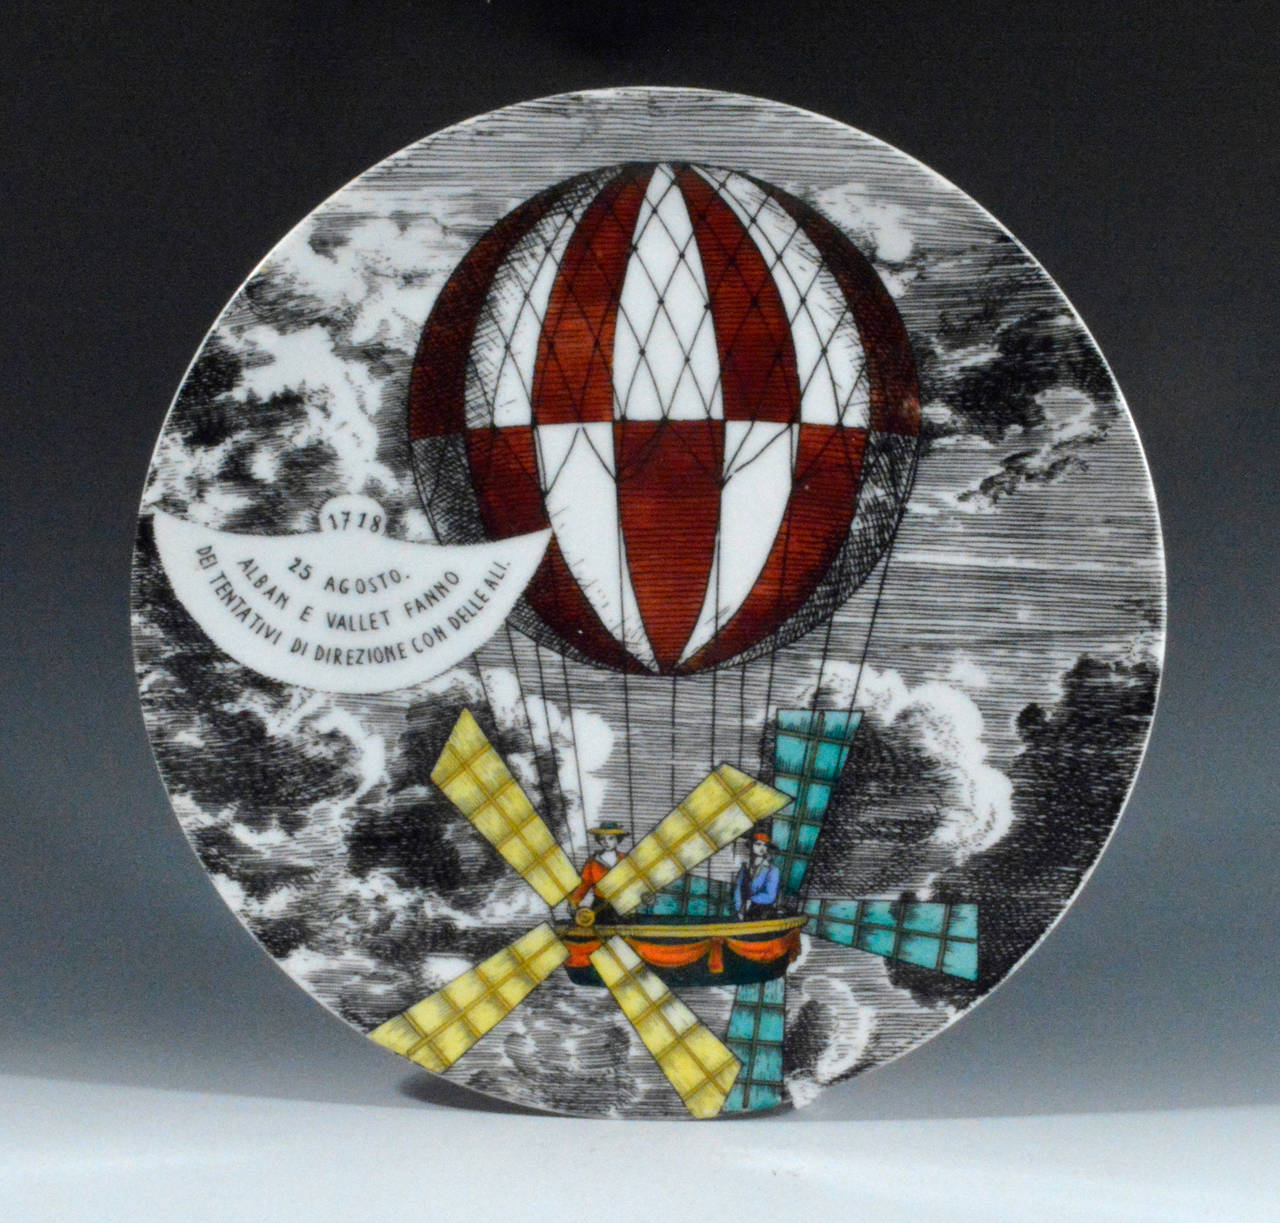 The large plates each depict a large hot air balloon with a panel describing the historical image. 

Each plate is numbered on the reverse. This set includes the following:-
2, 4, 5, 6, 7 (2), 9, 10, & 12.

Reference:
The name of the pattern